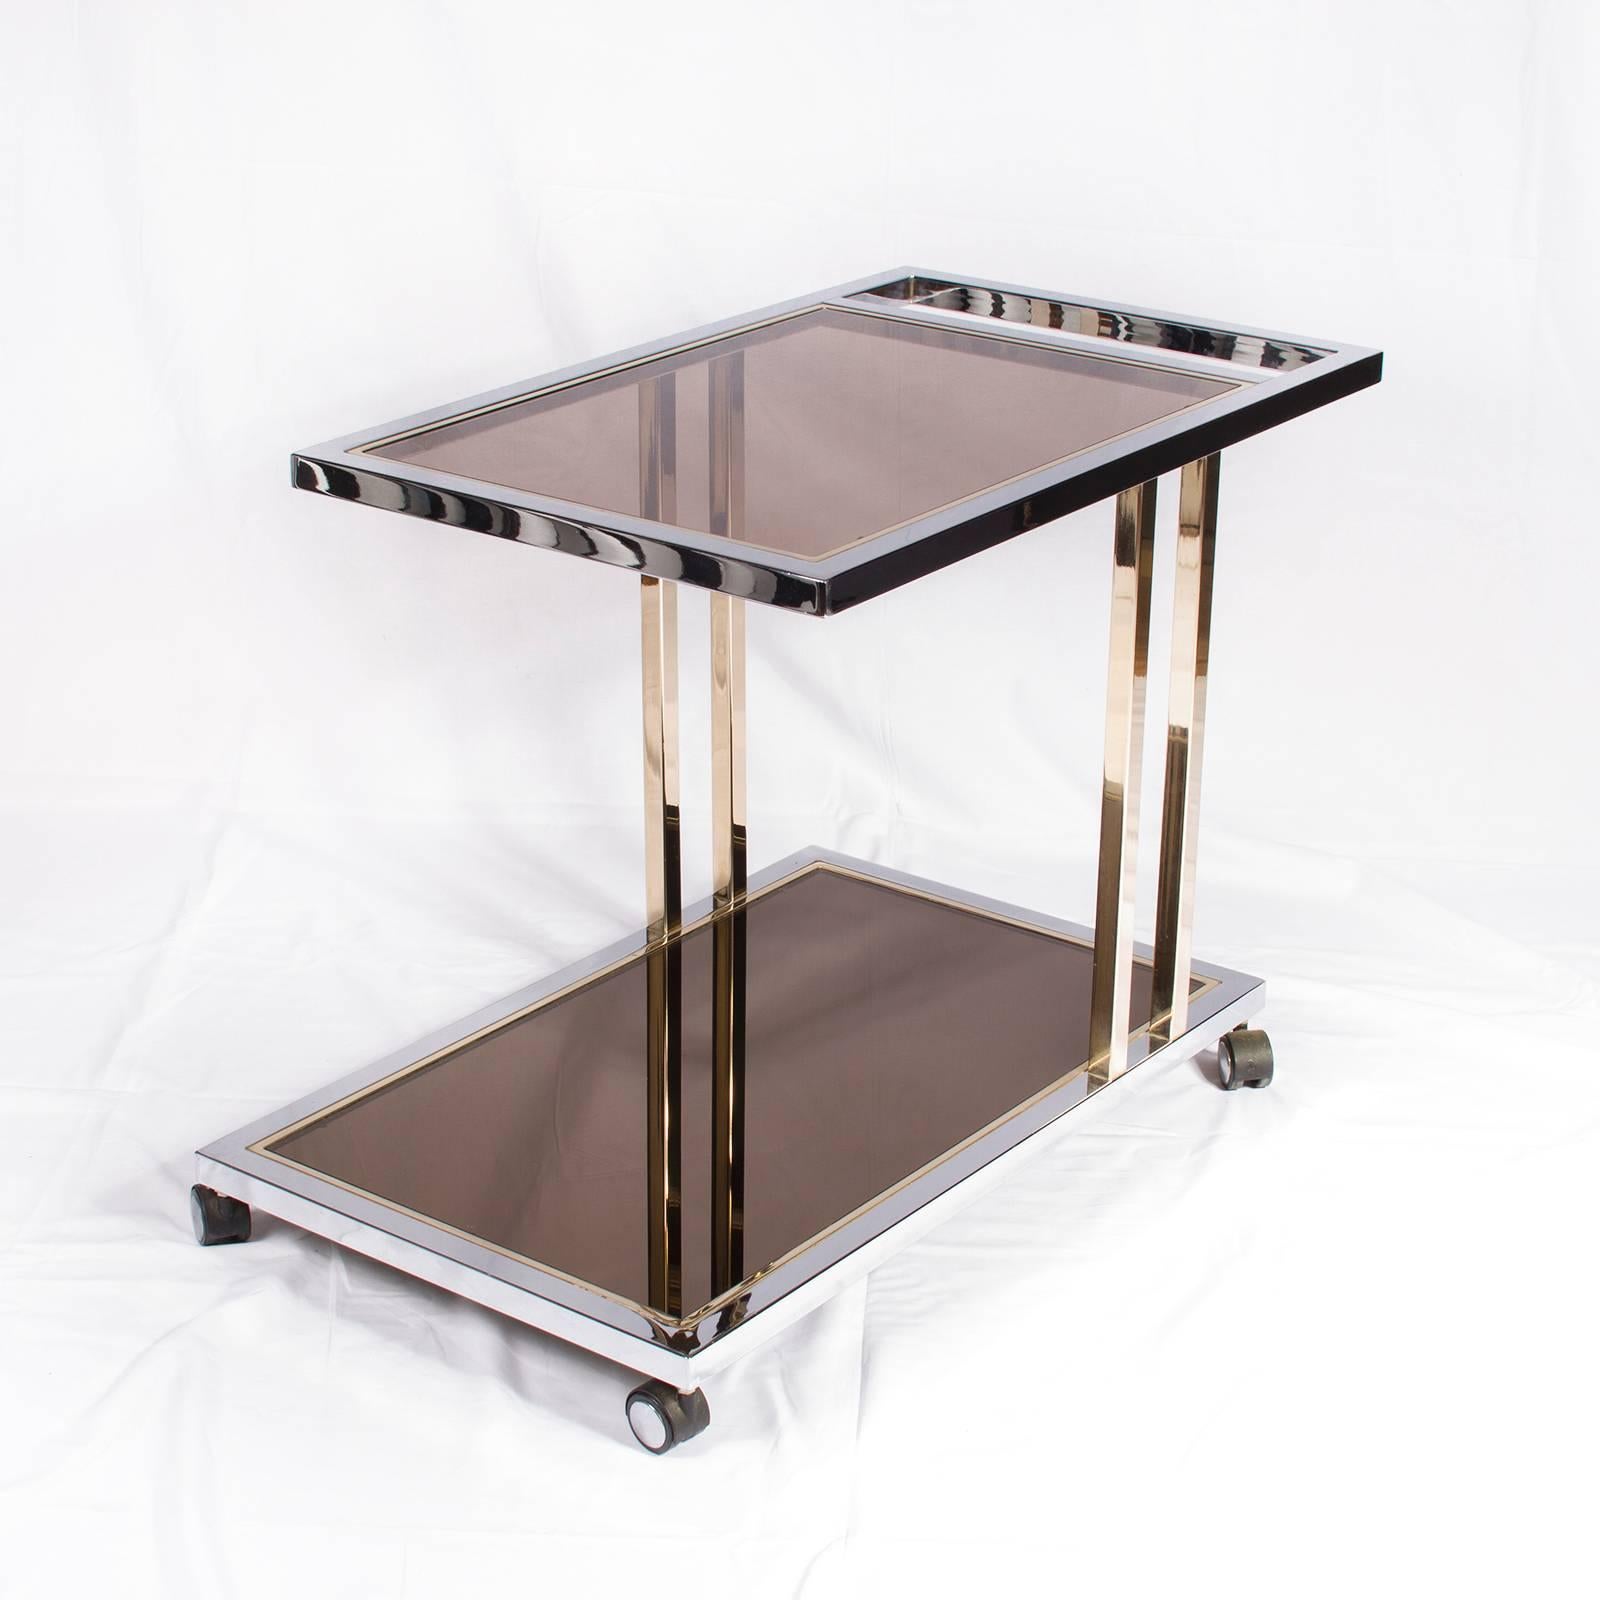 23-Carat gold-plated and chrome with smoky glass and bronze mirror, asymmetrical two tier bar cart, by Belgochrome.

Please contact us for delivery details.